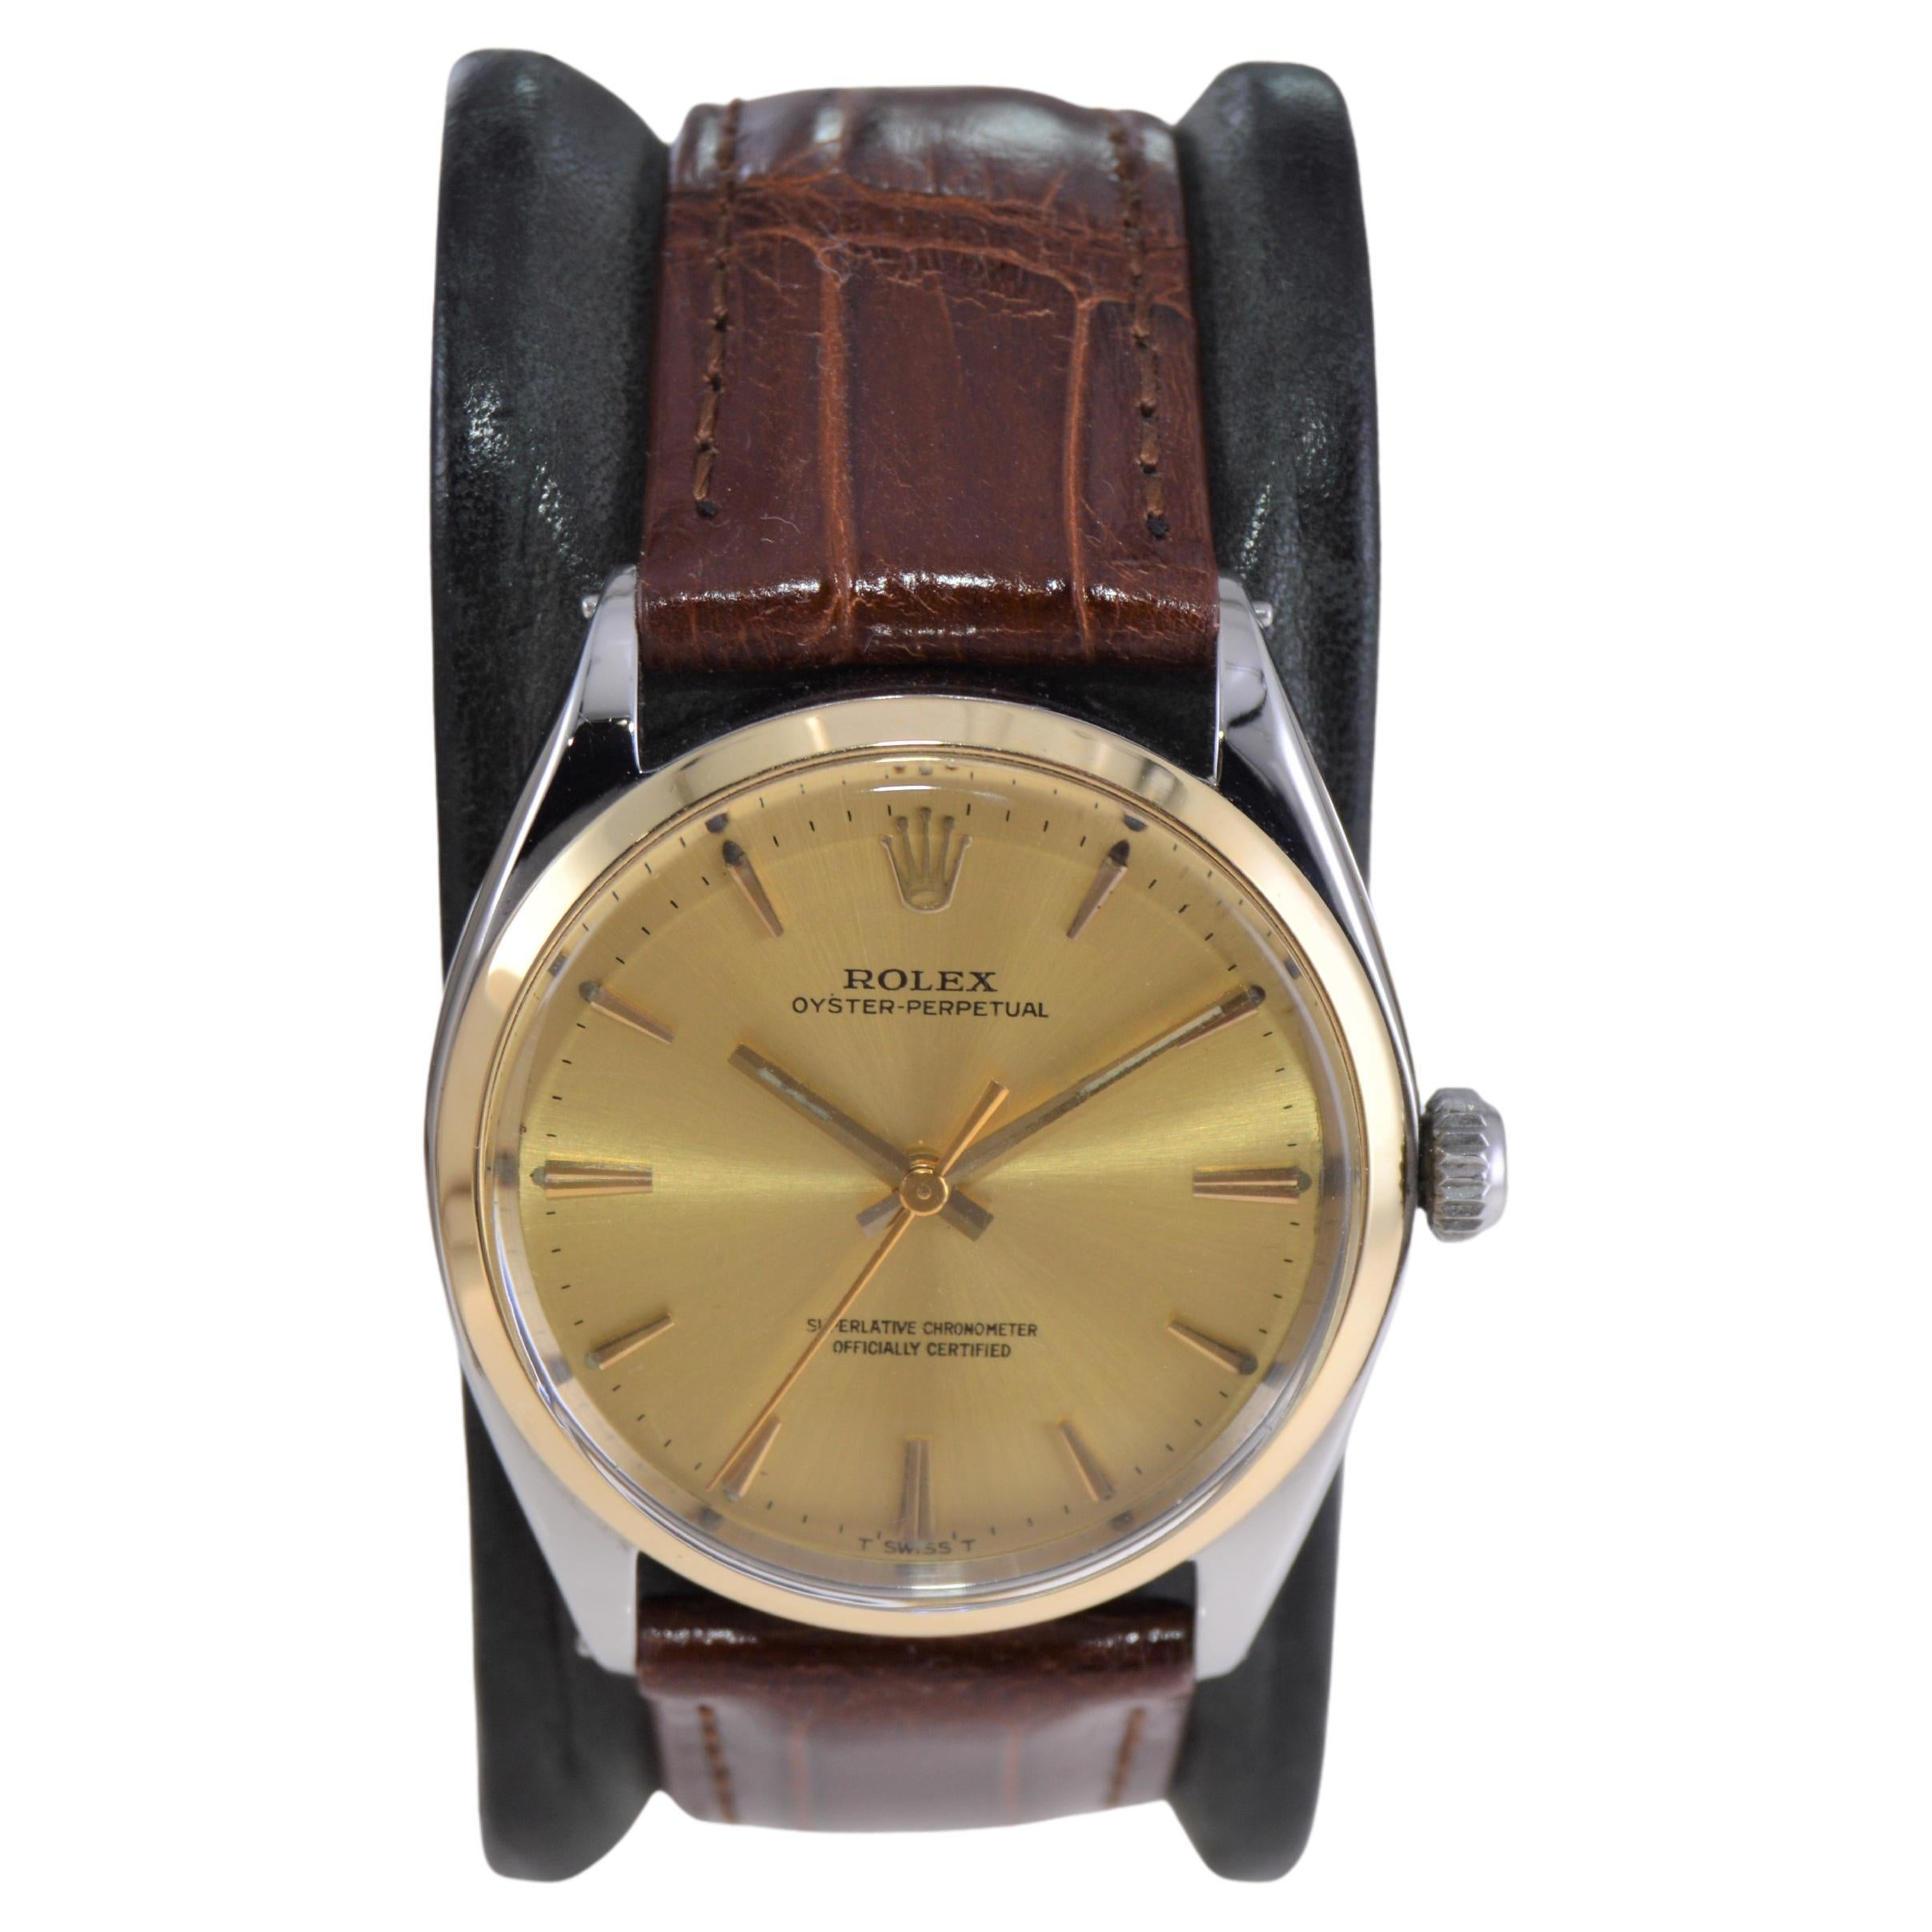 Rolex Oyster Perpetual Steel with Solid Gold Bezel and Original Dial from 1965